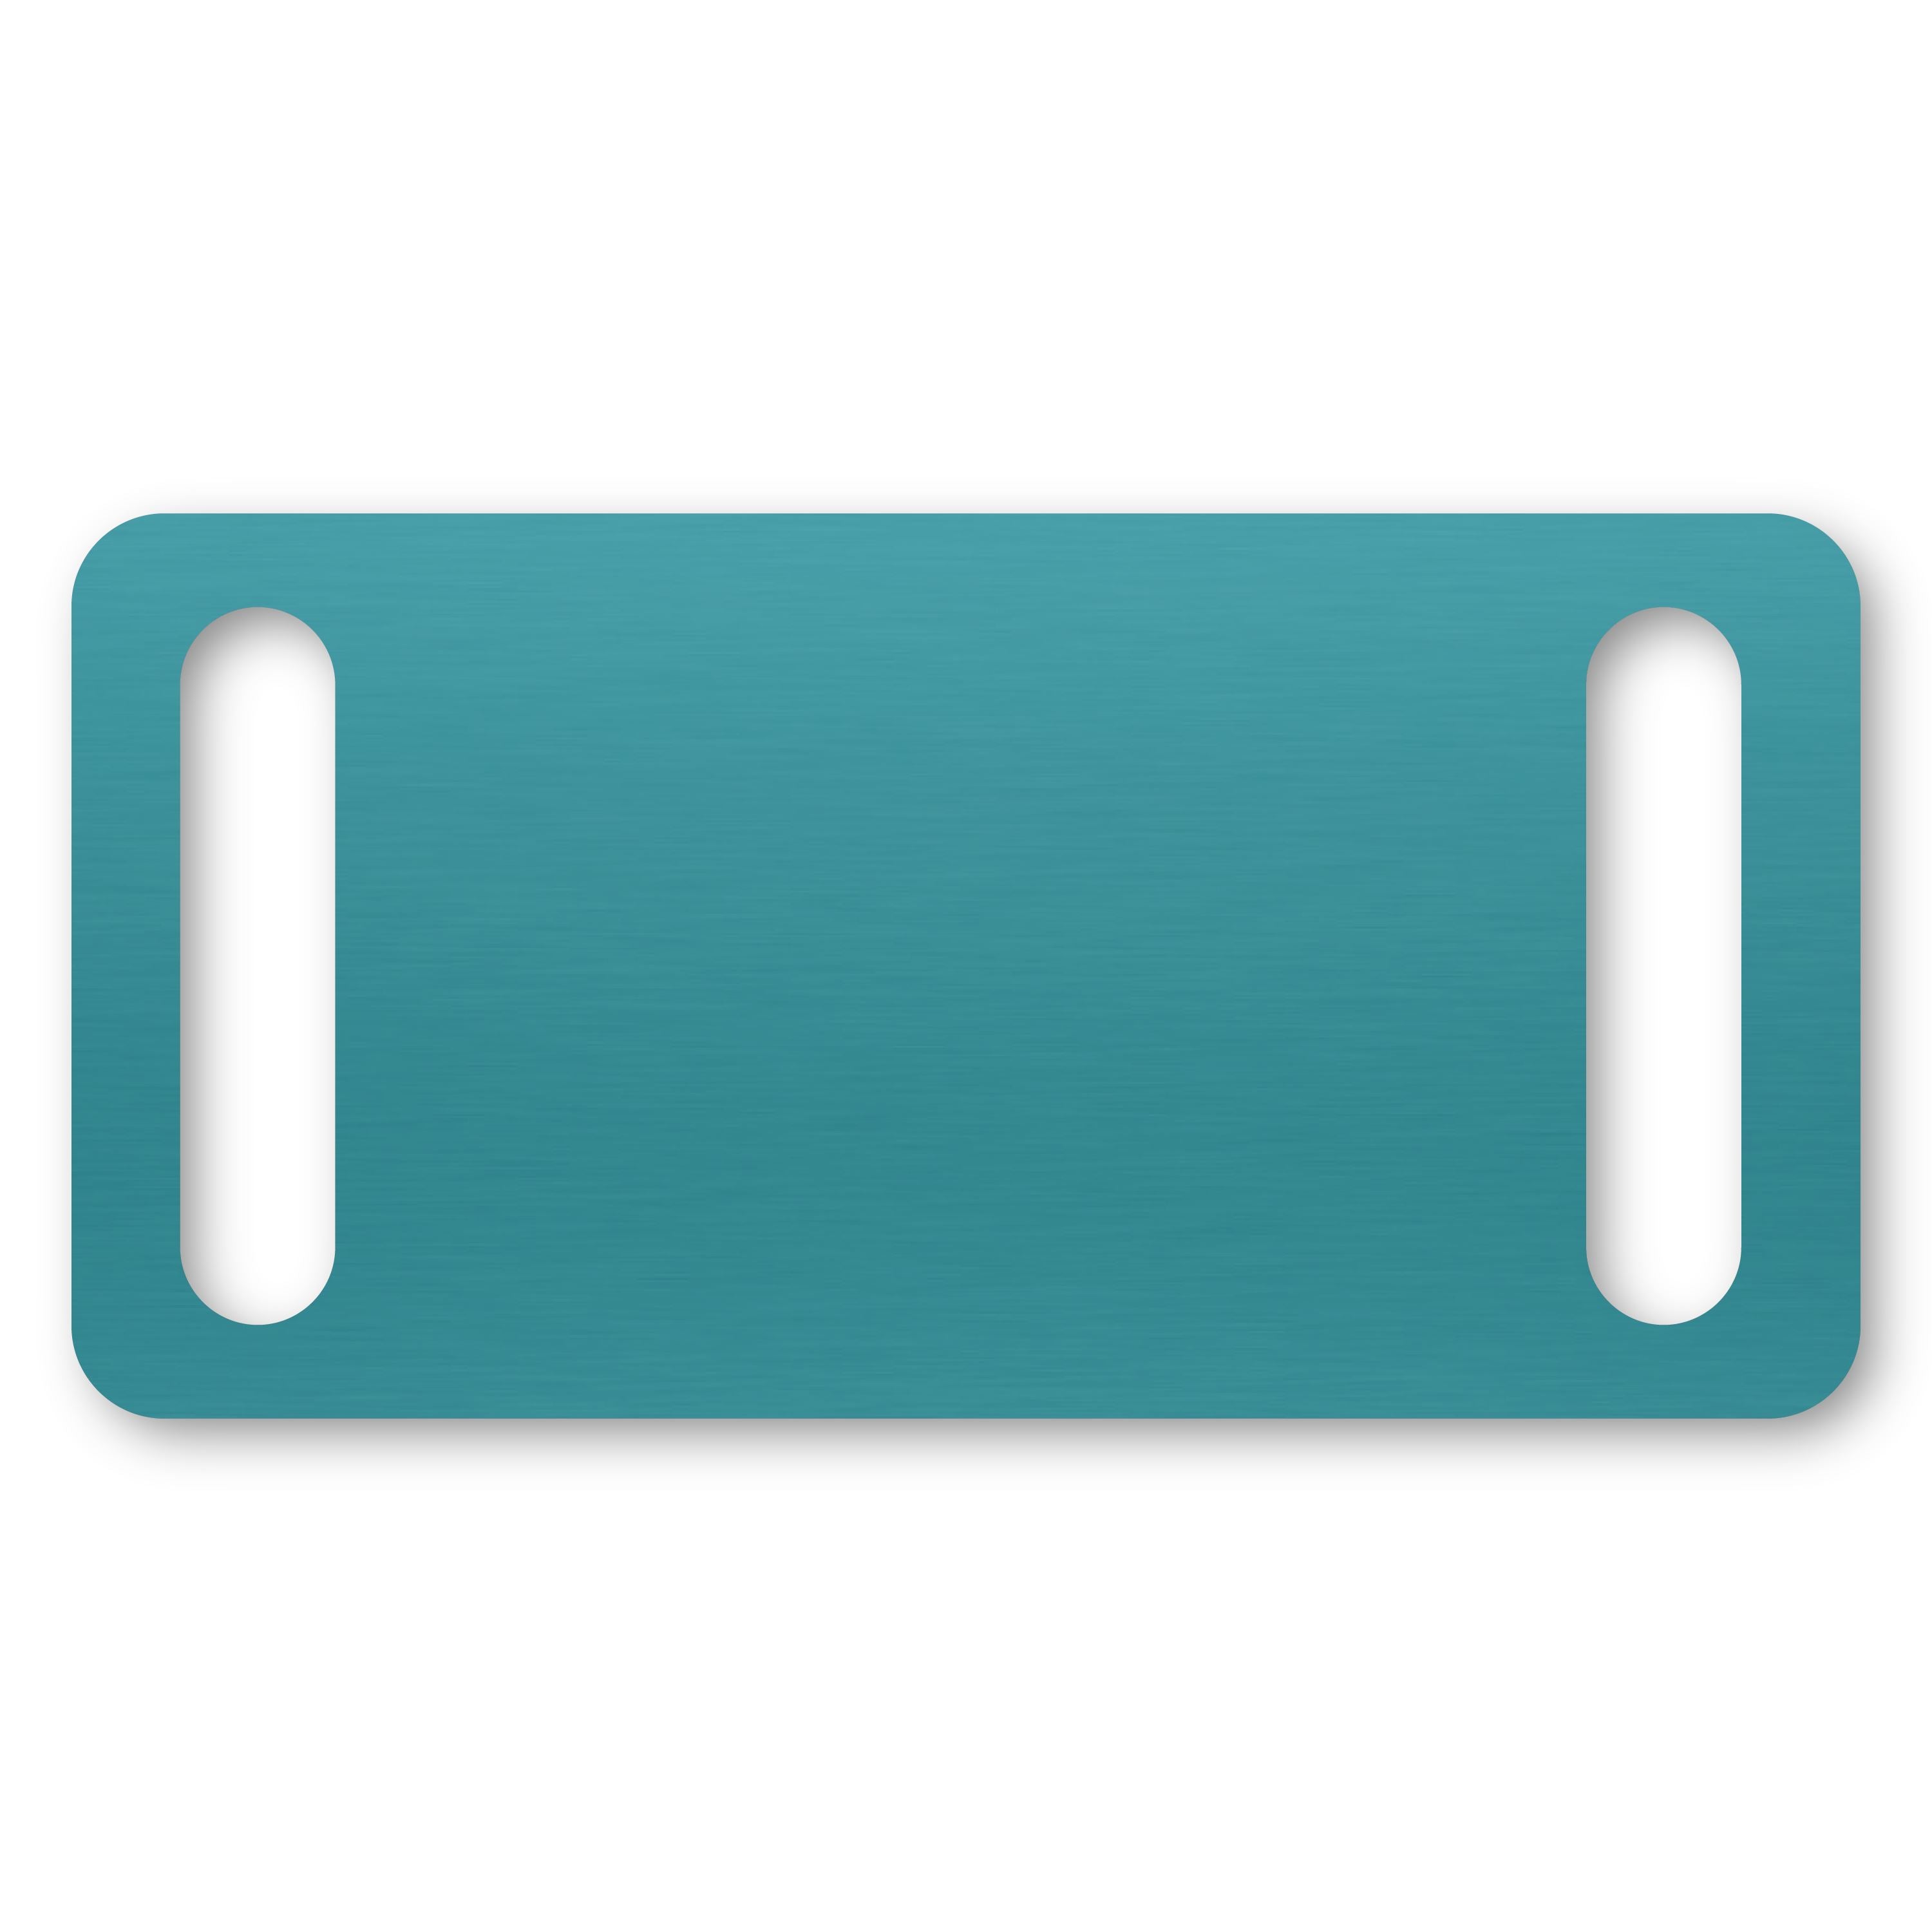 Anodized Aluminum Rectangle Slide-On Tags, 1-3/16" x 2" with 1/4" x 1" Slot, Laser Engraved Metal Tags Craftworks NW Turquoise 